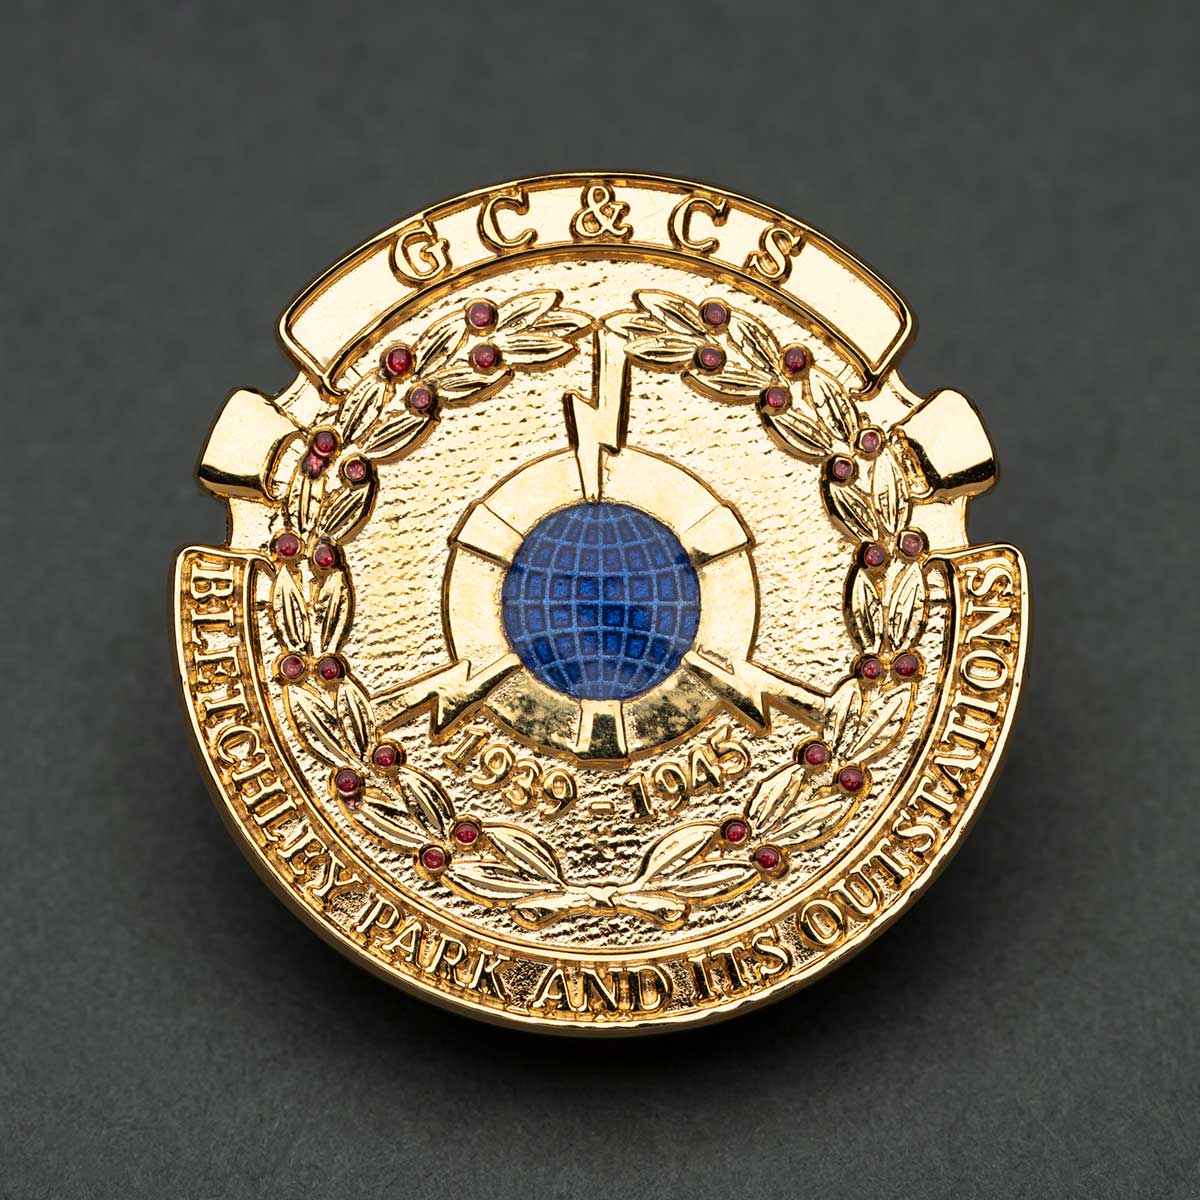 A circular gold badge with a blue globe in the centre and embossed text including 